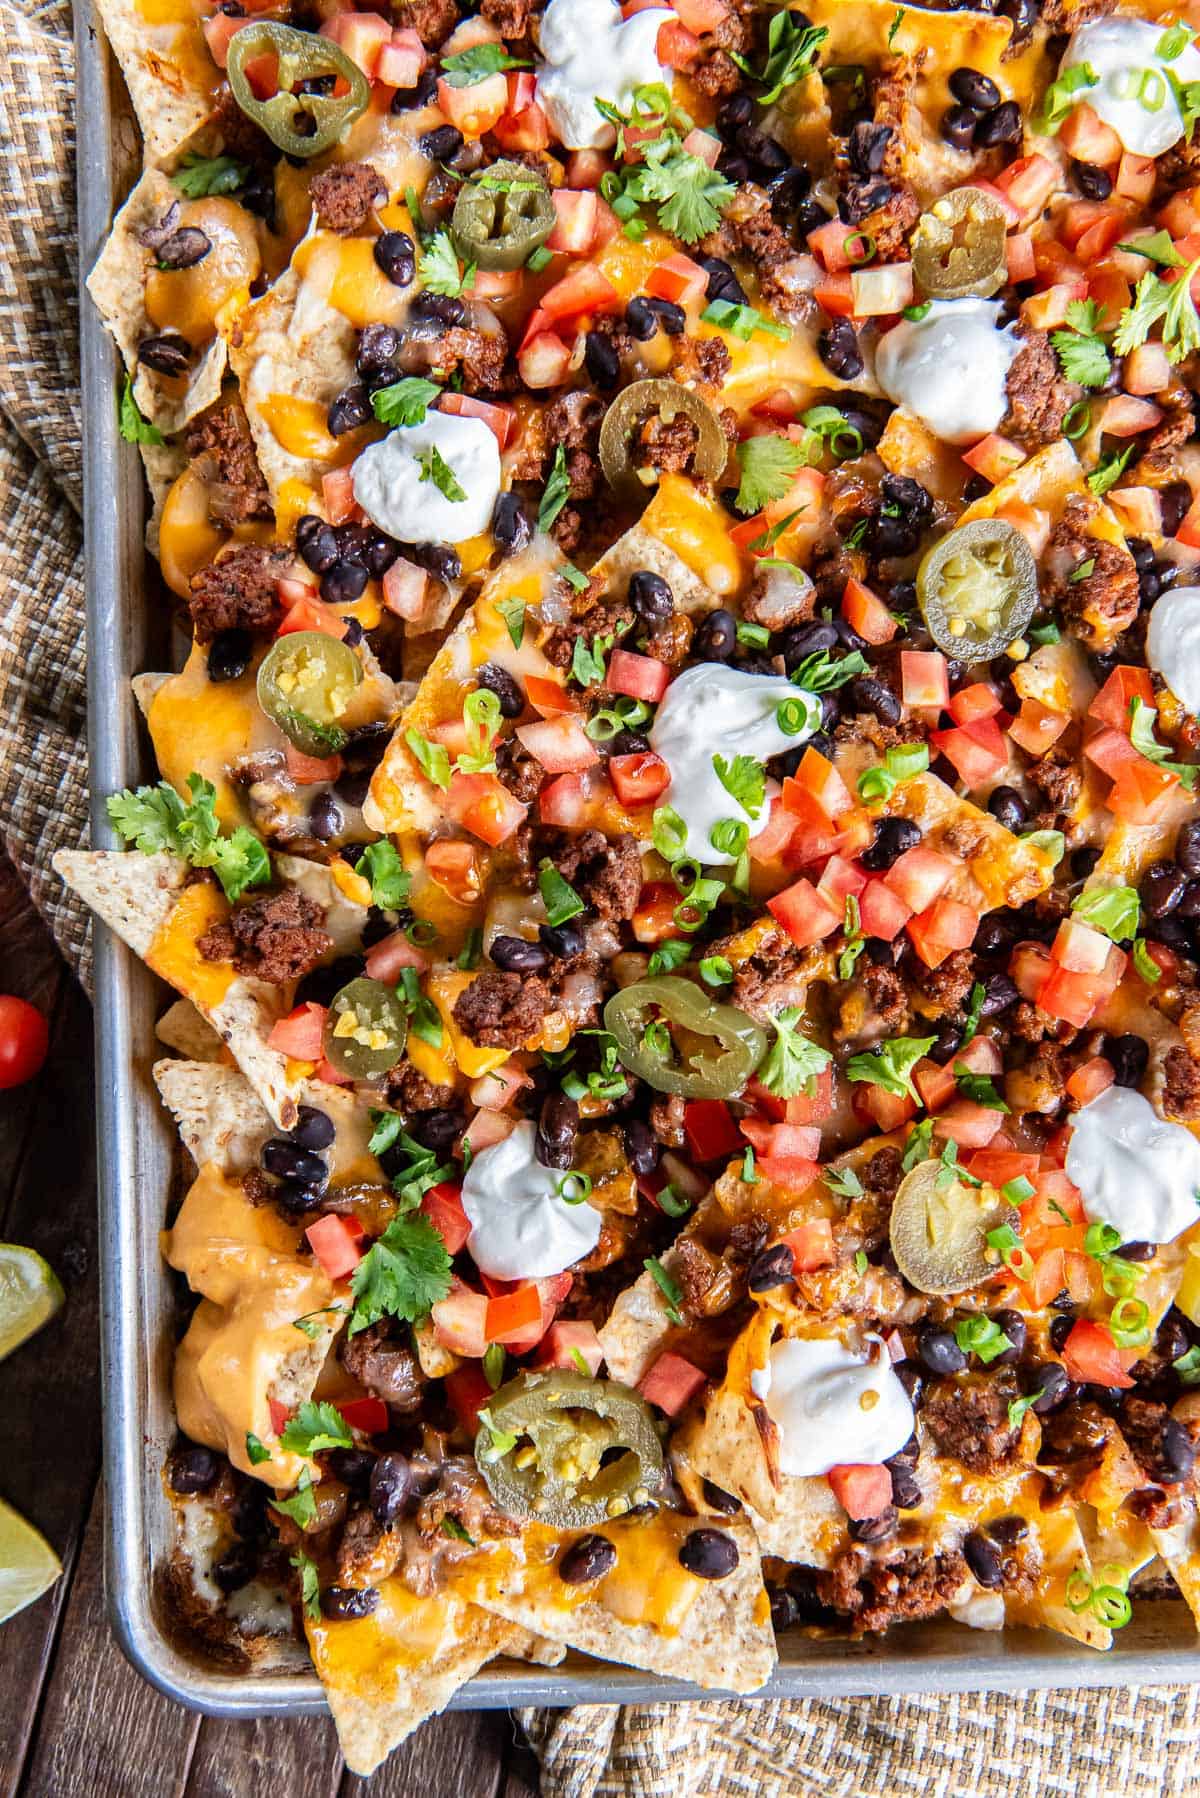 Nachos with ground beef, nacho cheese sauce, tomatoes and sour cream on a baking sheet.